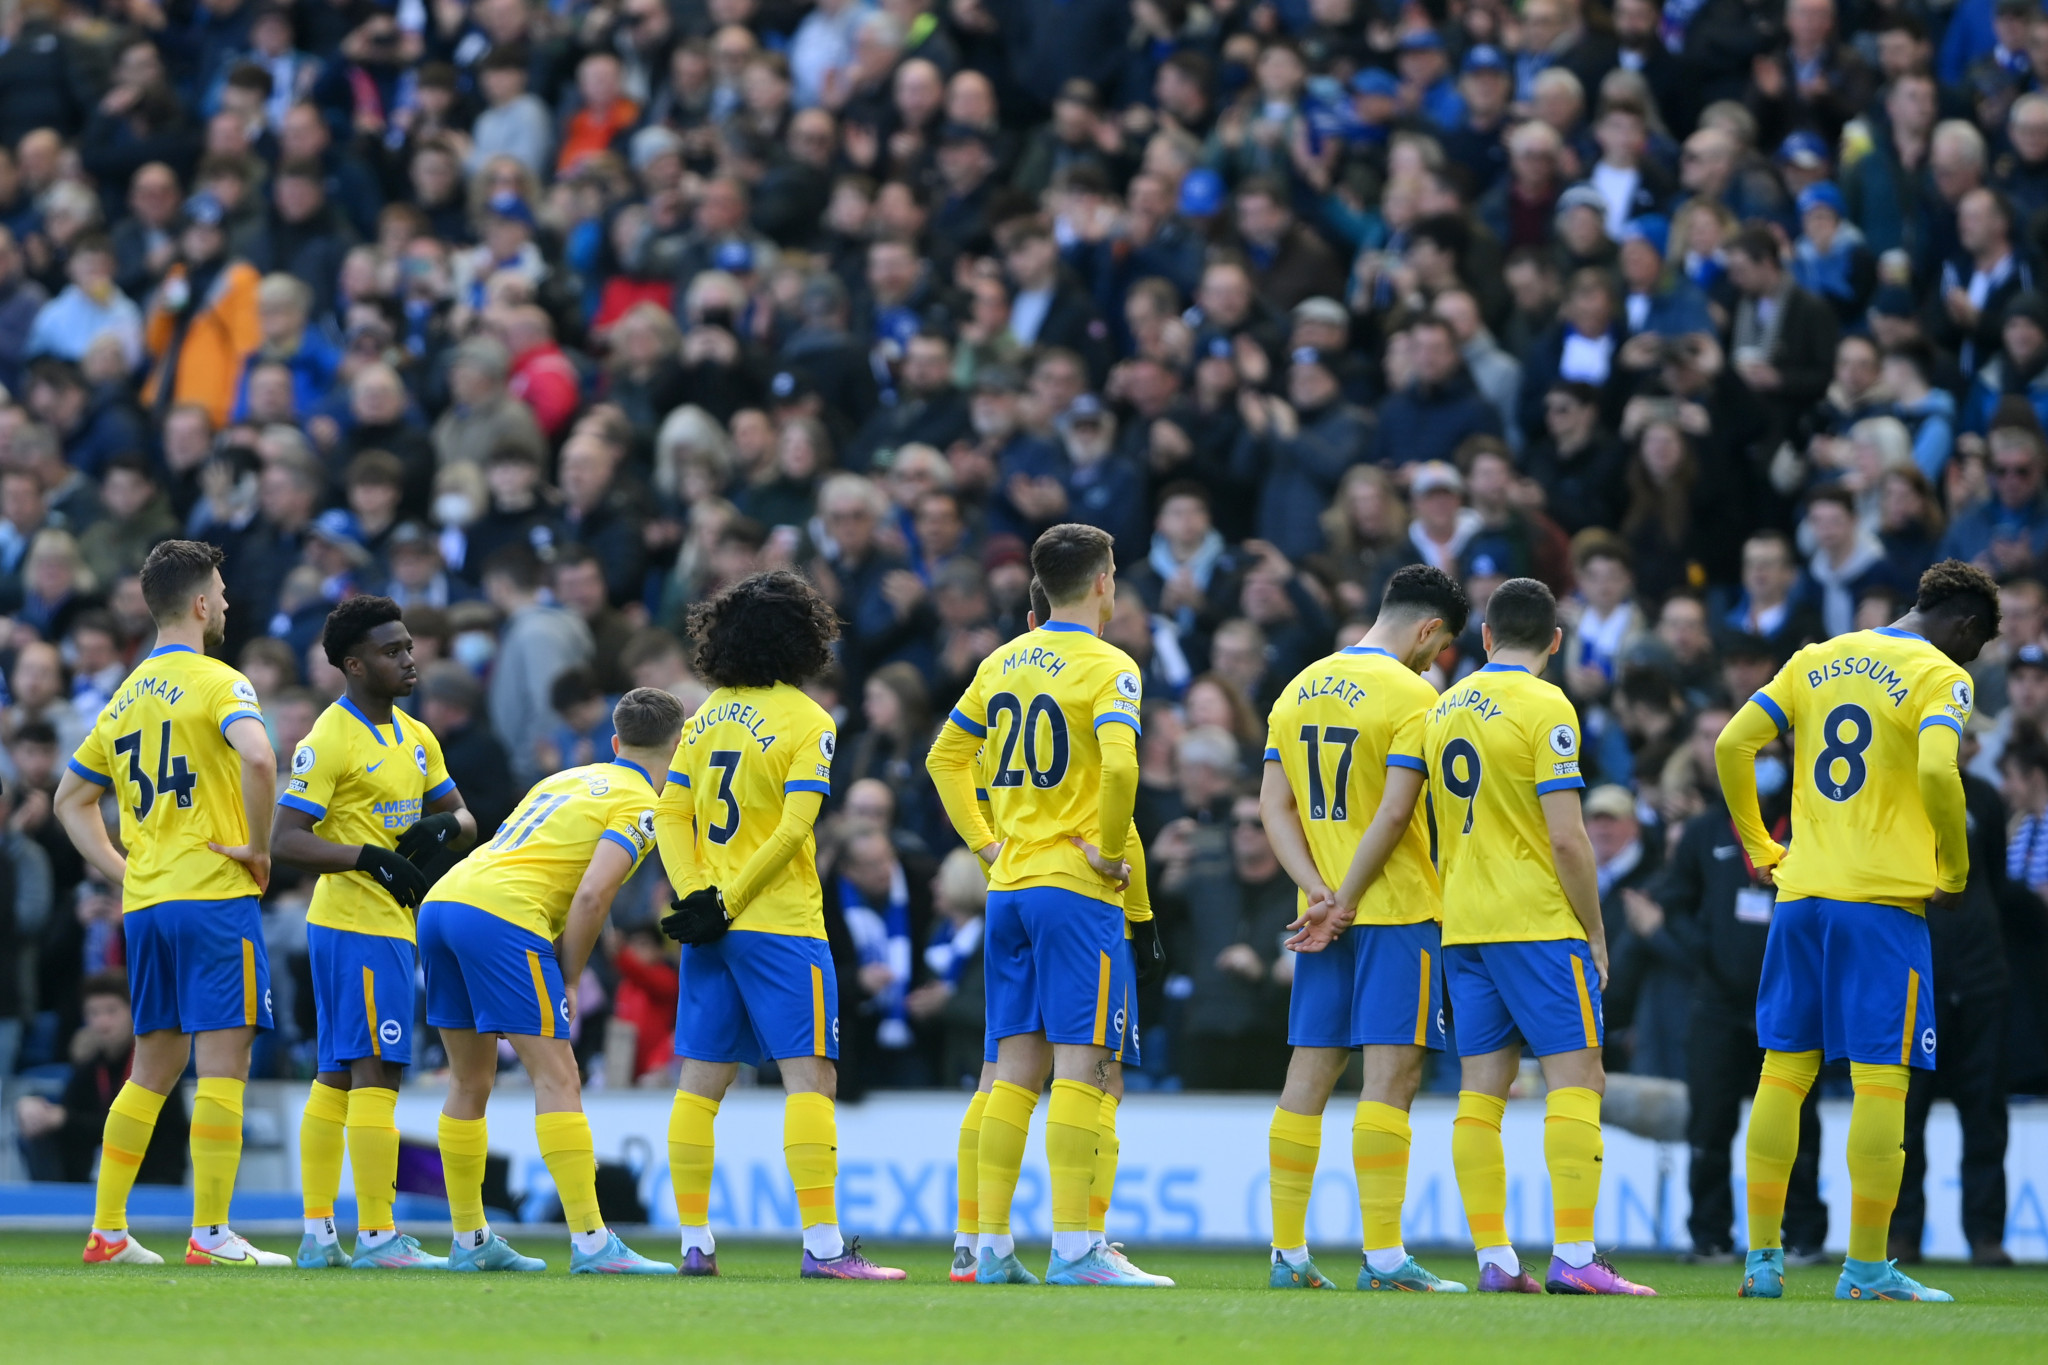 Players of Brighton & Hove Albion wore a home kit in the colours of the Ukrainian flag to indicate peace and sympathy with Ukraine ©Getty Images